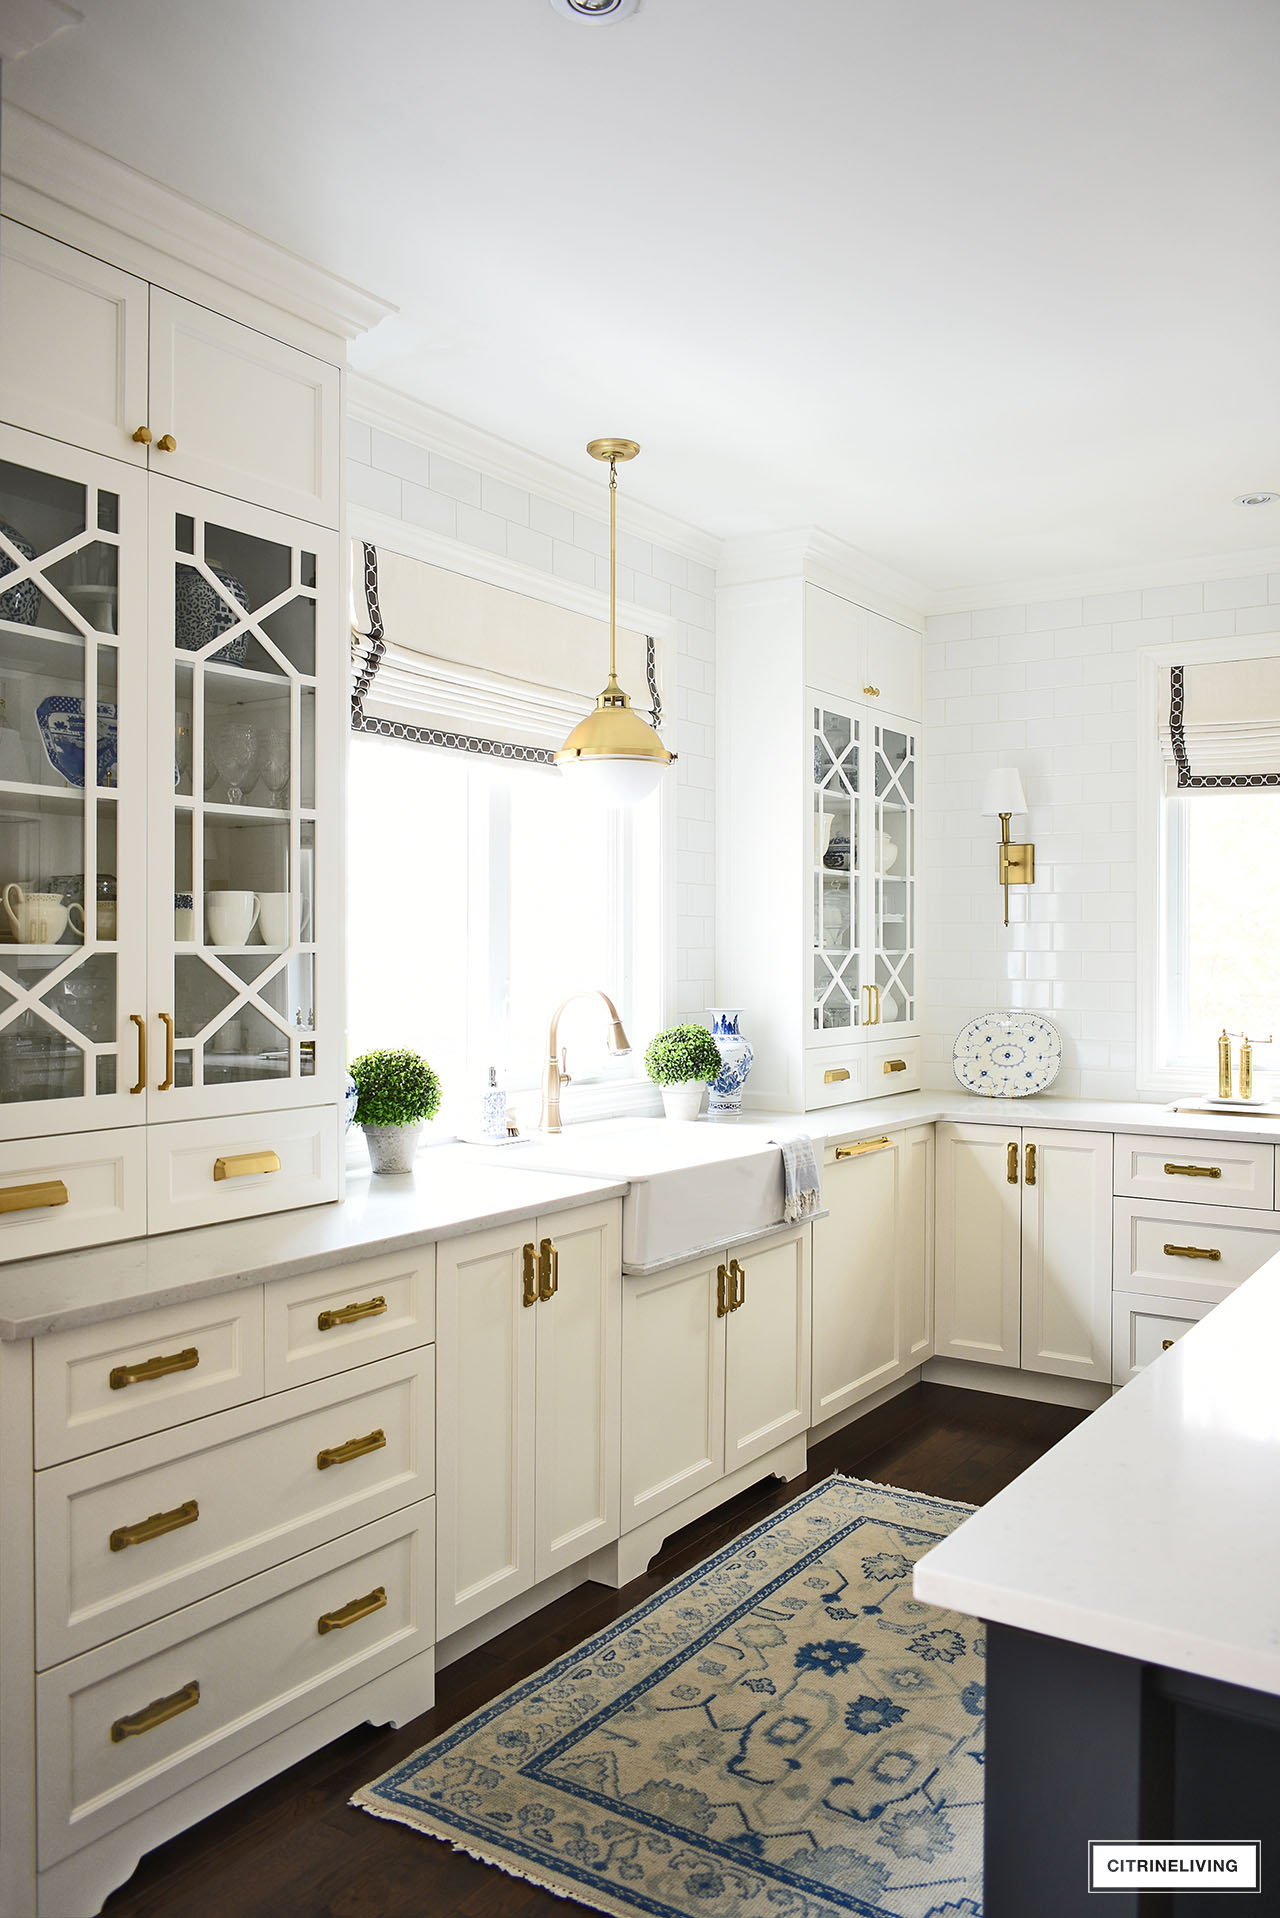 white kitchen with custom glass cabinet doors in a trellis/fretwork pattern